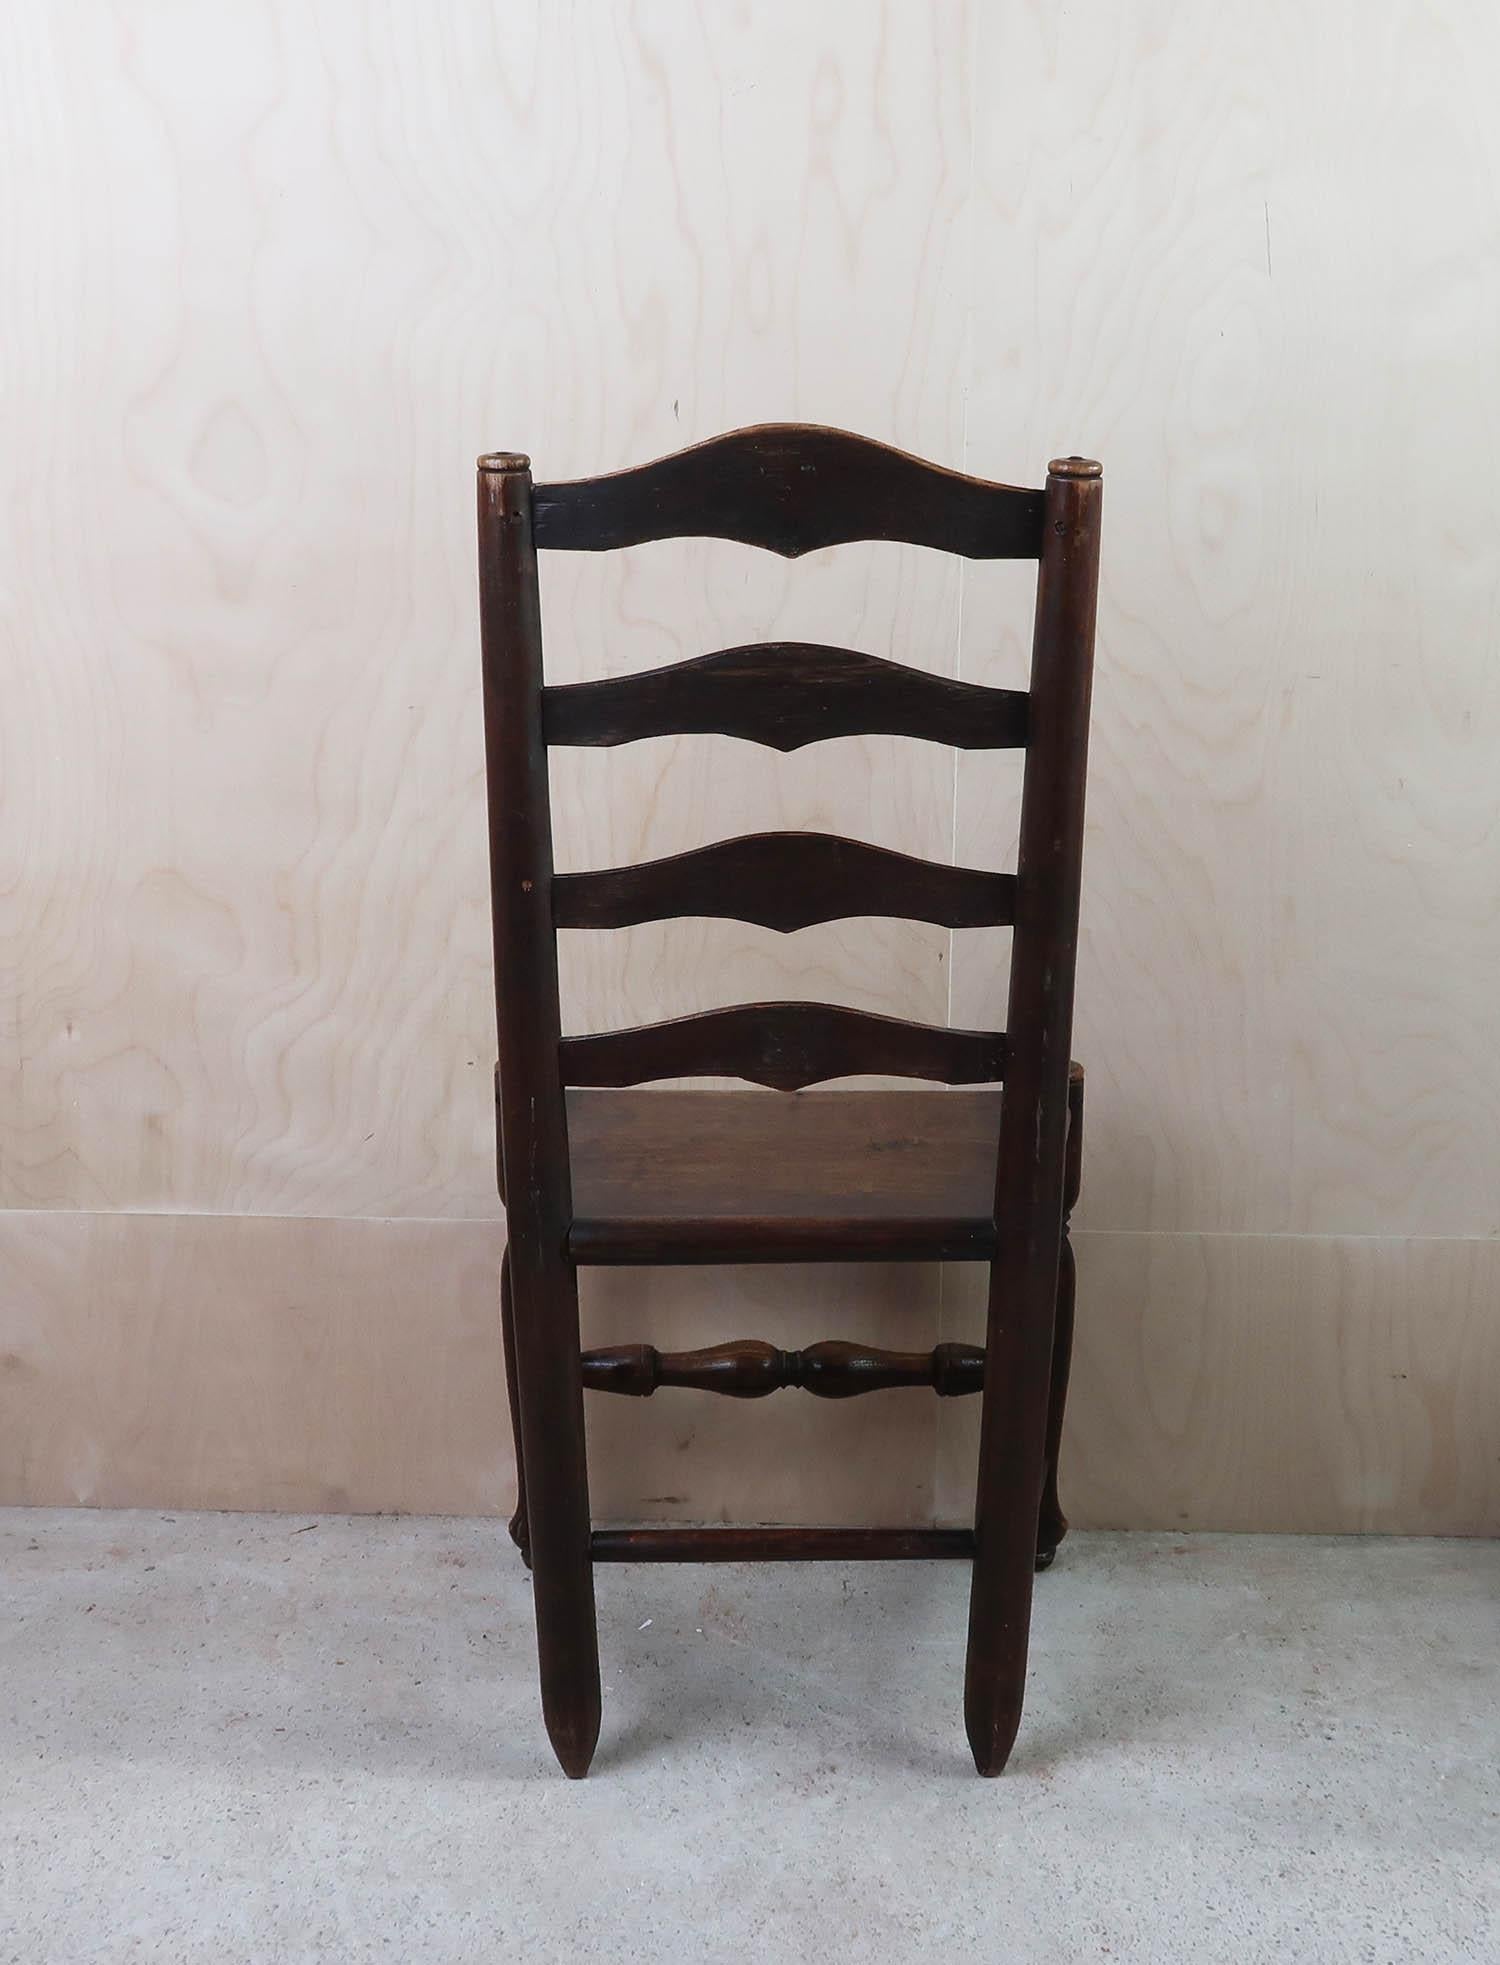 Near Pair of Antique Welsh Country Ladder back Chairs. C.1800 im Angebot 2